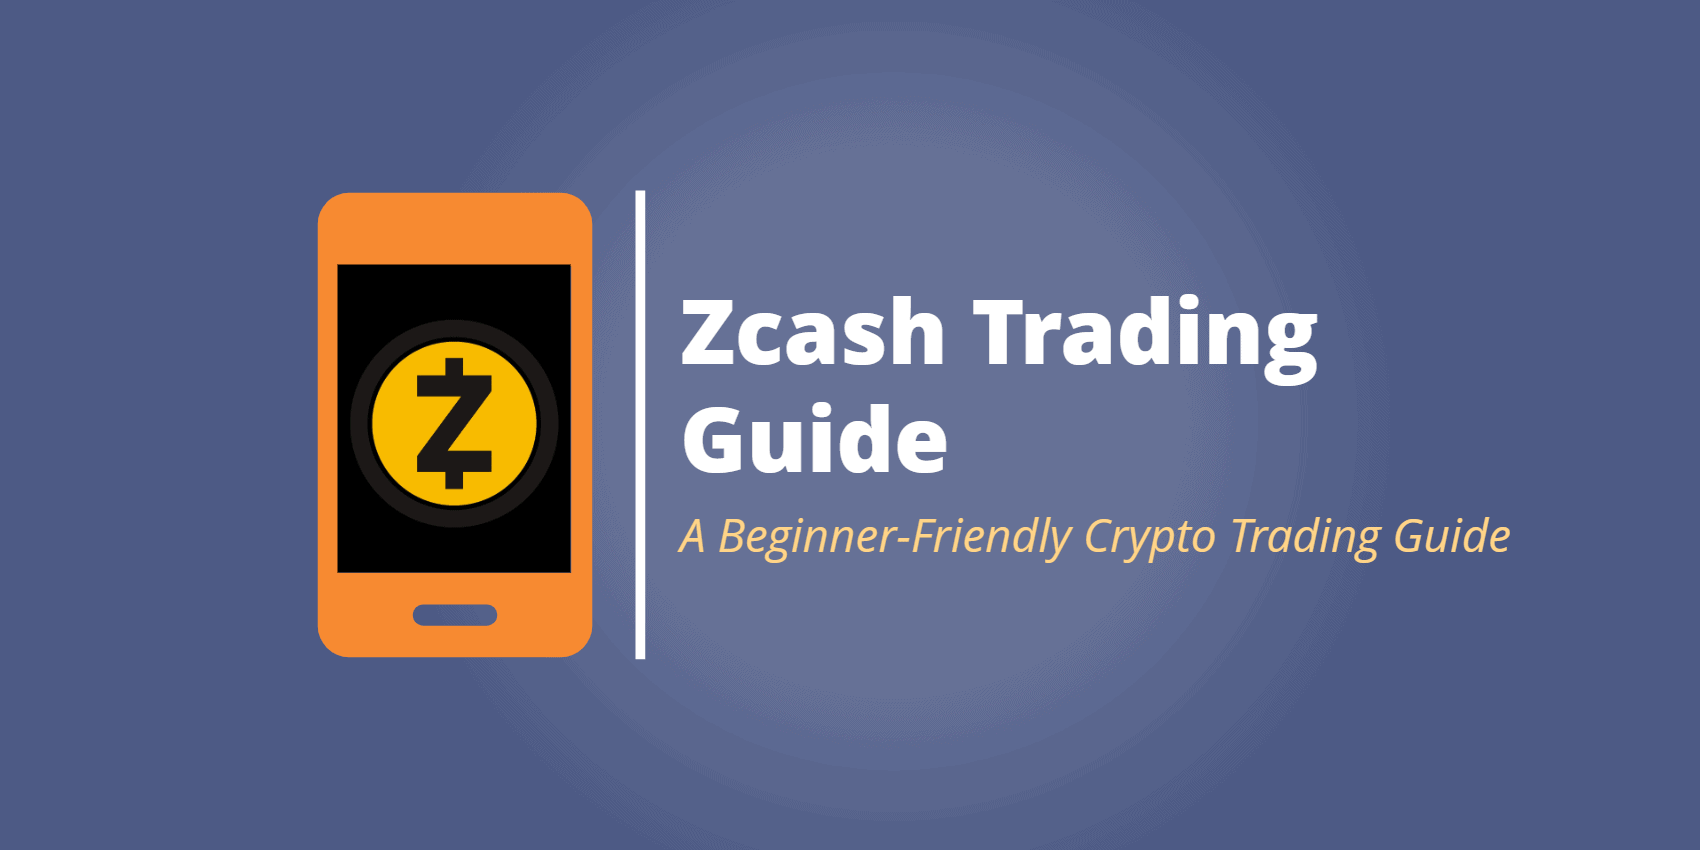 Zcash exchange charts - price history, trade volume on popular markets